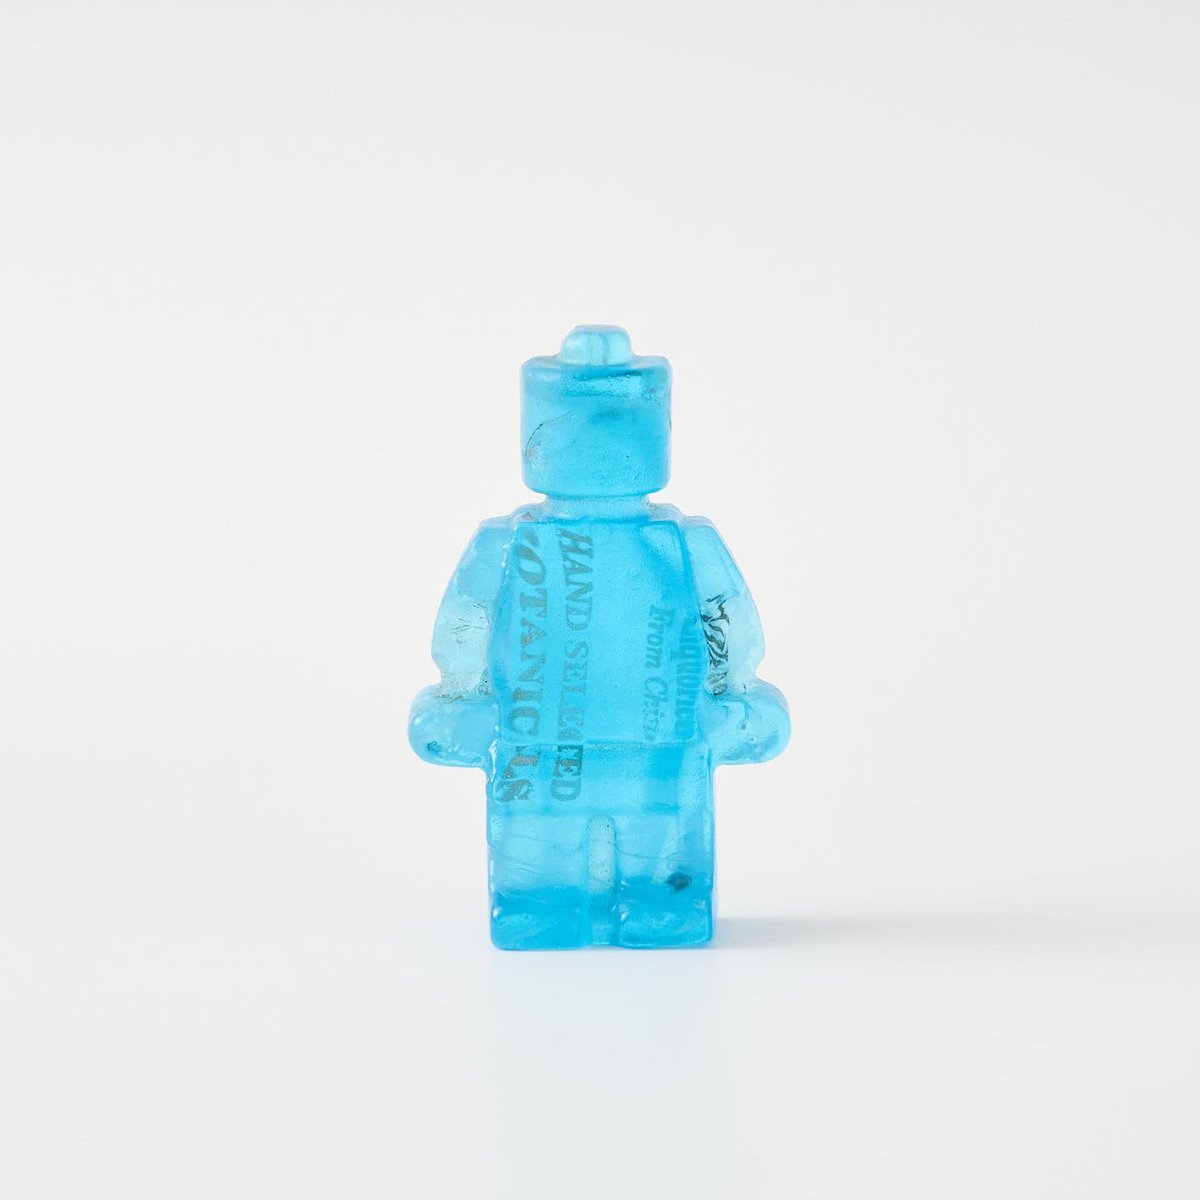 Recycling Narratives

This 9 cm tall cast glass Sweet Nothing, has been made from recycled @BombaySapphire bottles 💙♻️💙

Photograph credit @Al_ick 

#Materiality
#castglass
#recycle
#recycledglass 
#figurativeglasssculpture